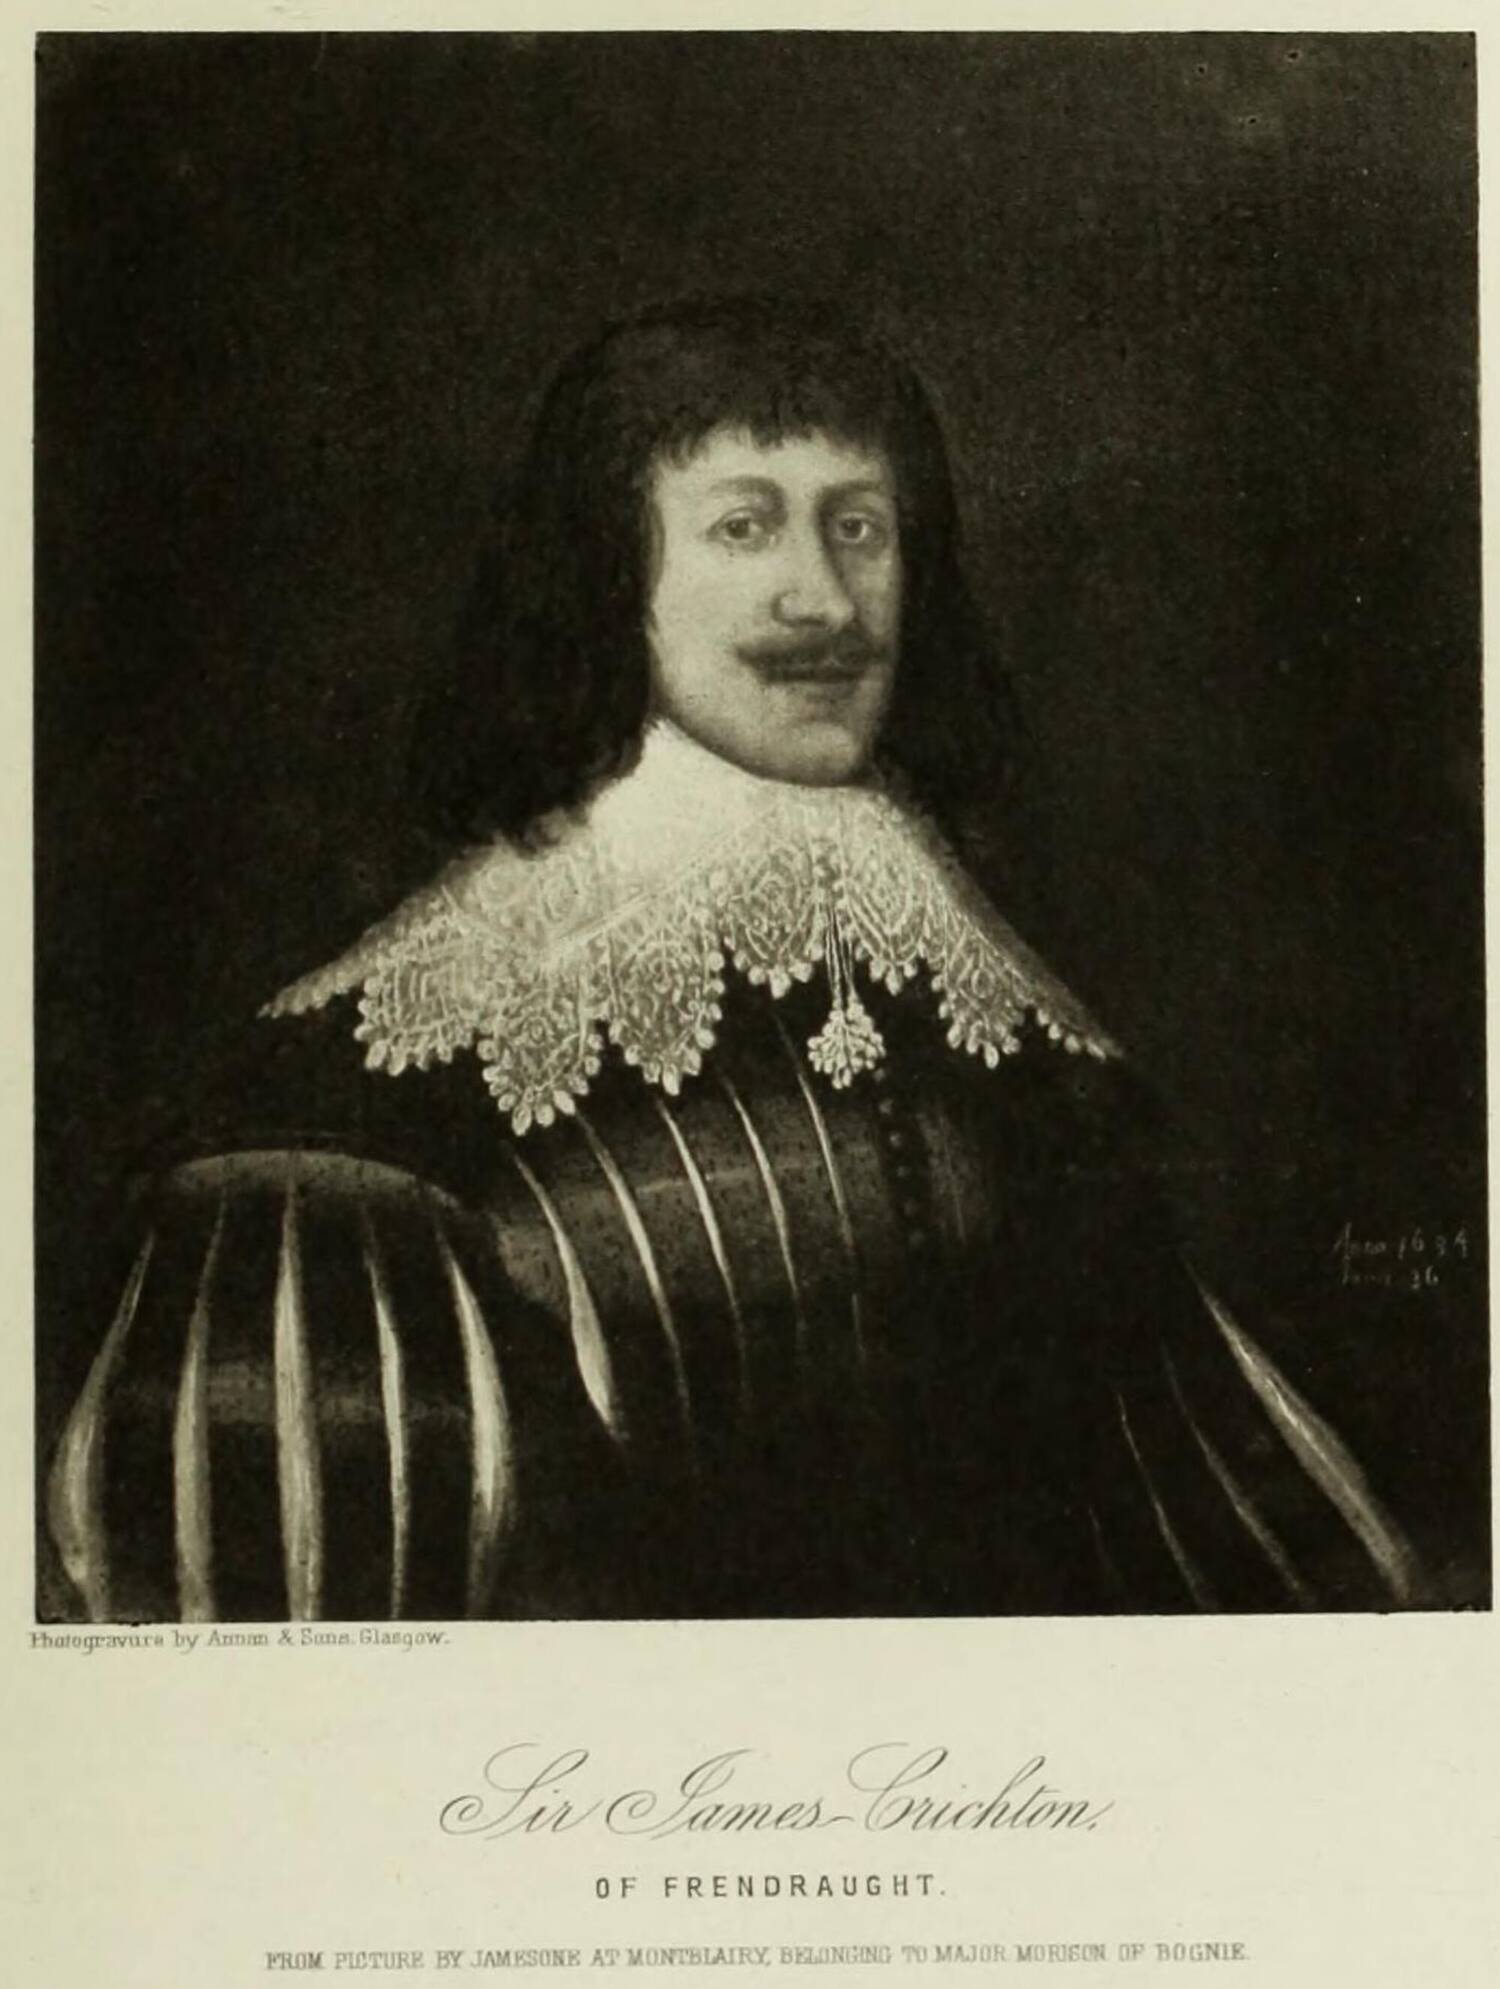 Black and white engraving of a man in 17th-century costume. He has a moustache and long dark hair.